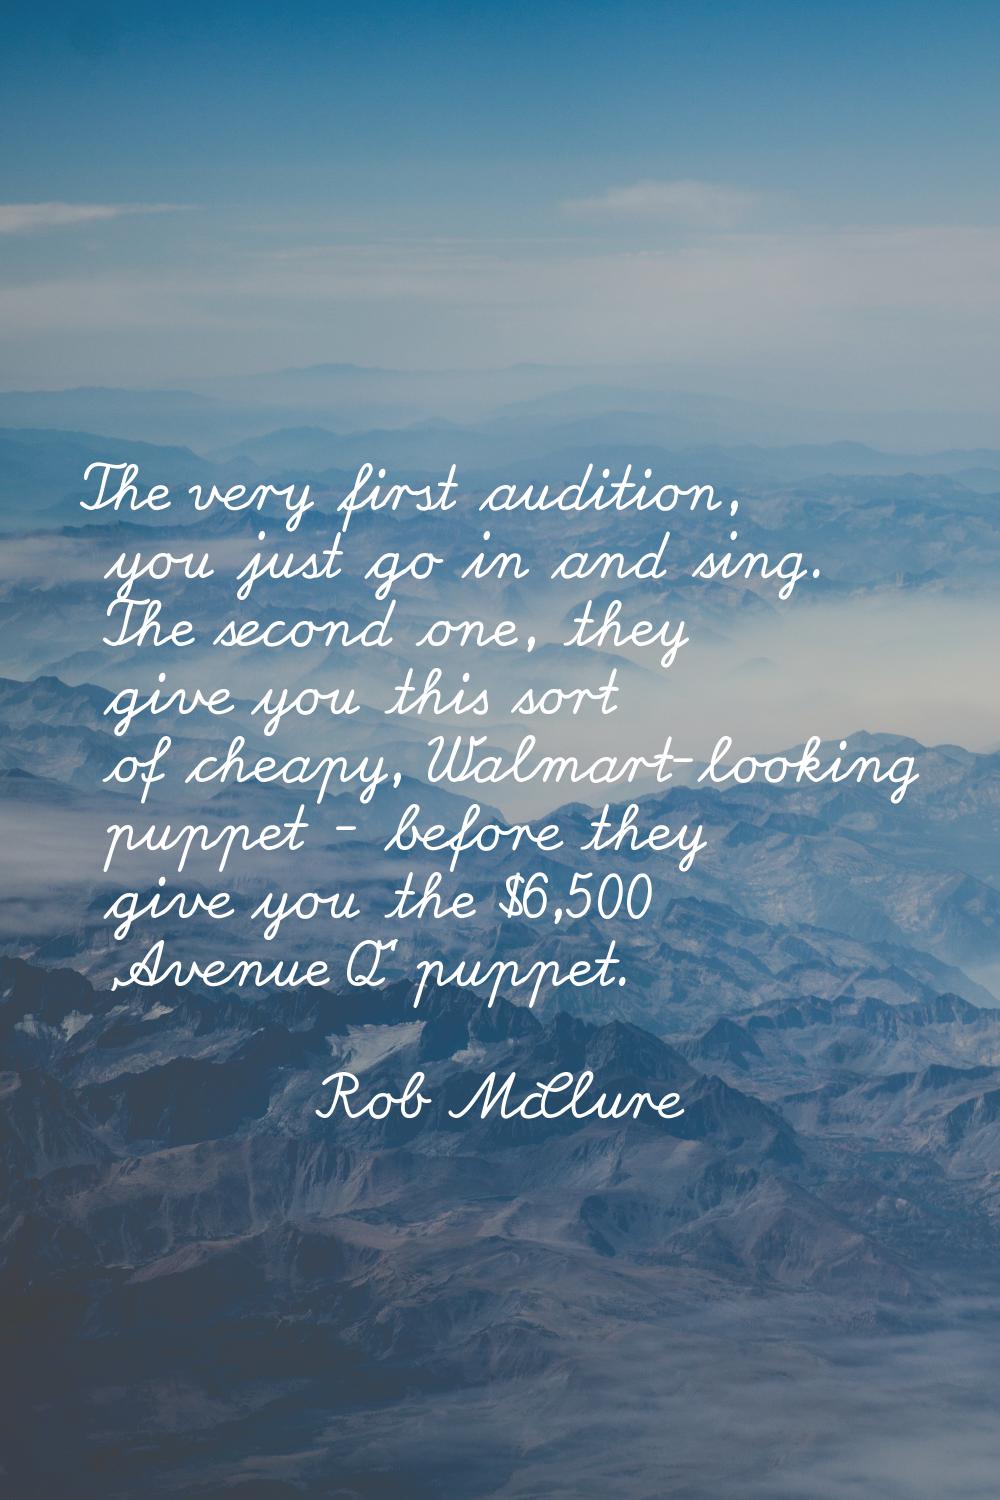 The very first audition, you just go in and sing. The second one, they give you this sort of cheapy